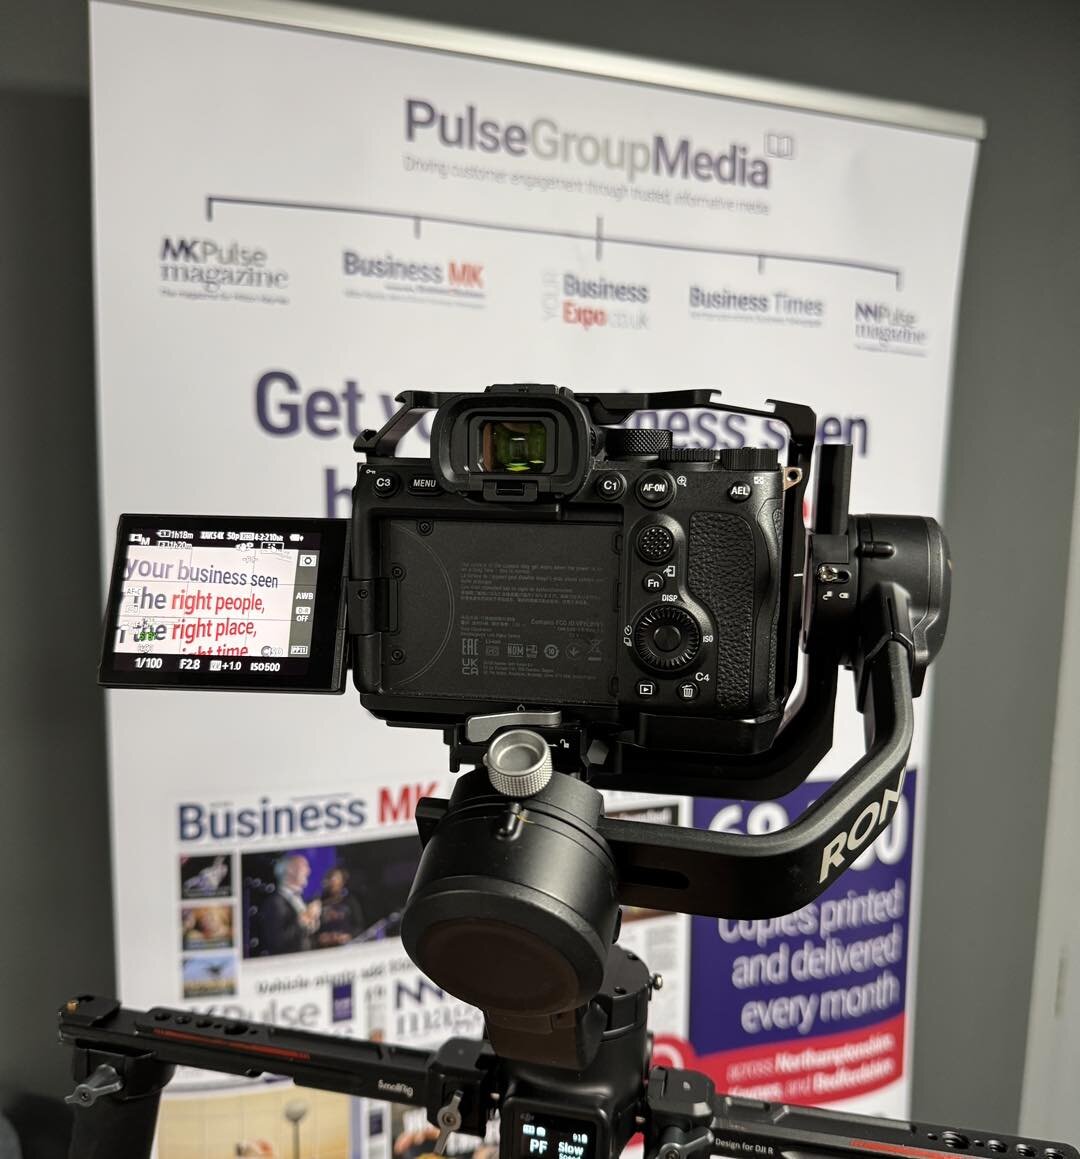 Filming today at Your Business Expo!

Looking forward to a busy day here at Bedford. It also gives me the chance to use some brand new kit! 

Results coming soon!

#videography #video #bedford #miltonkeynes #sony